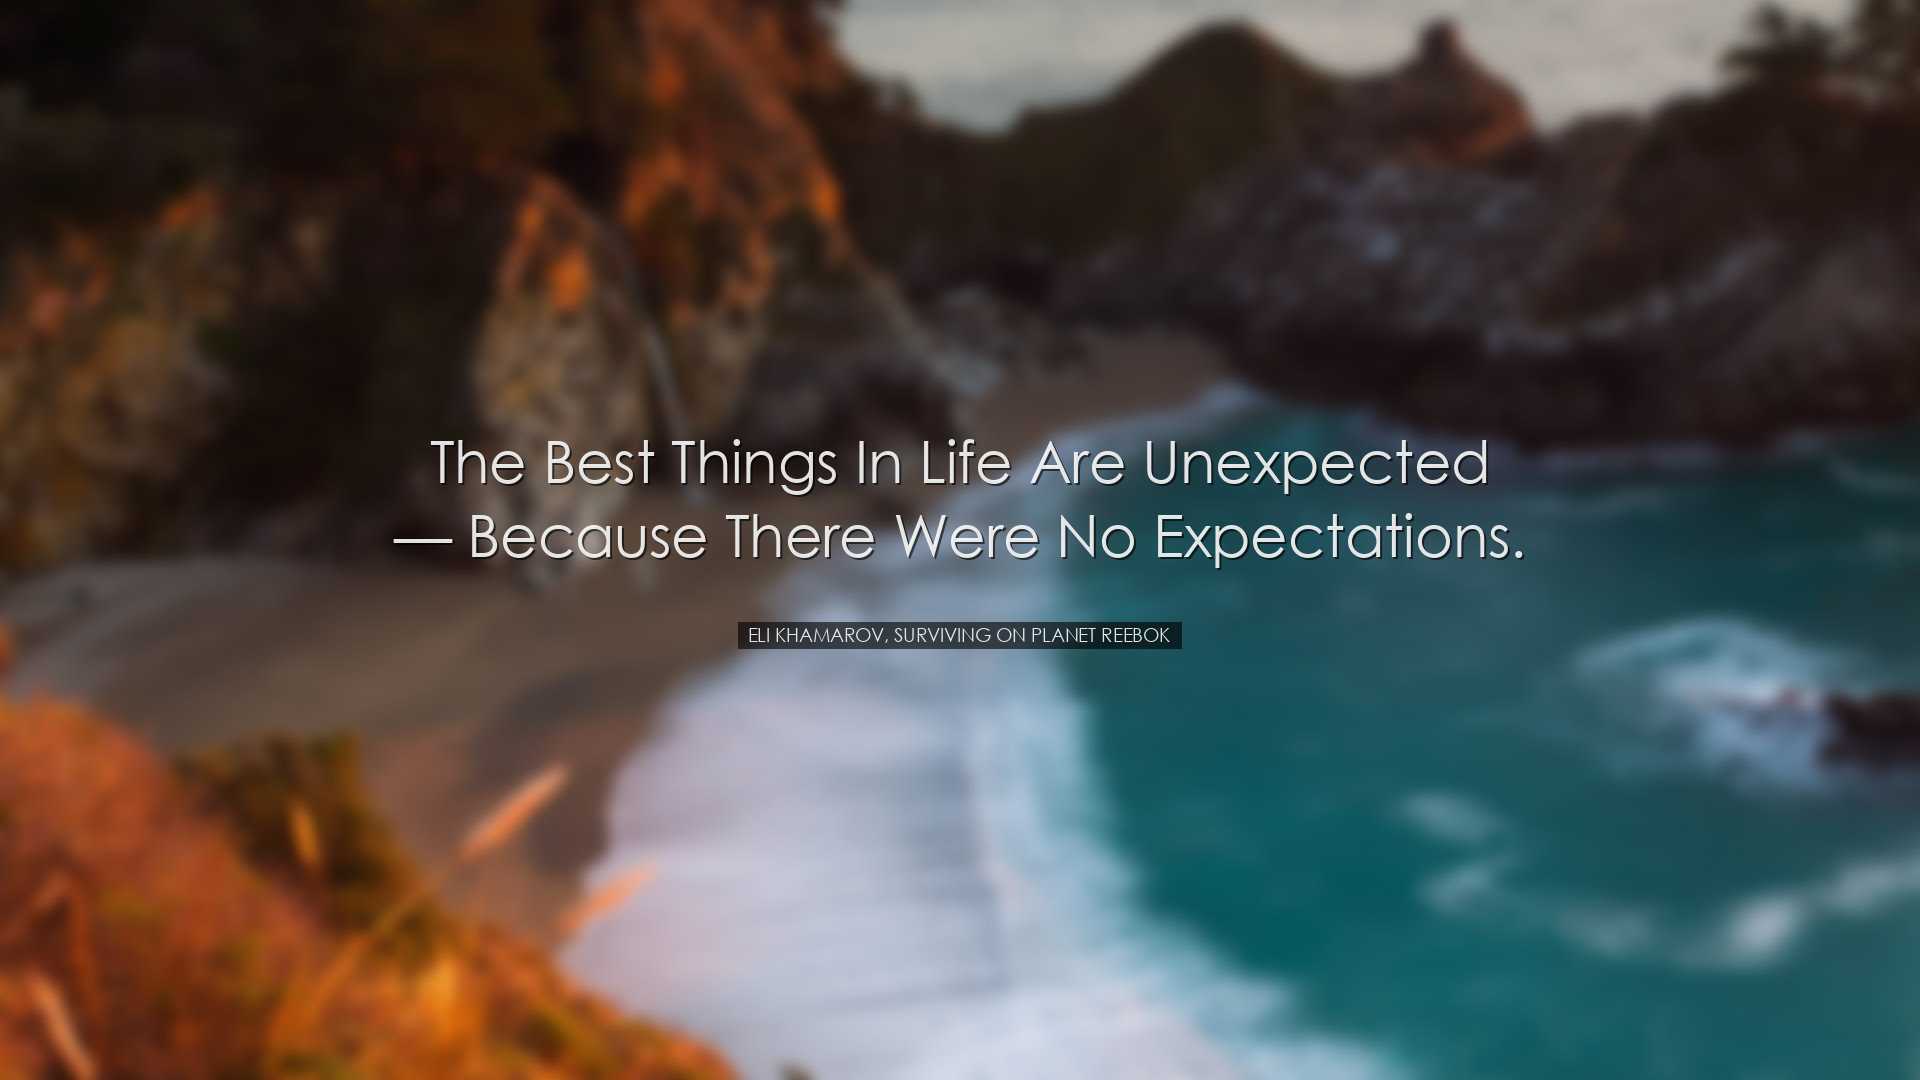 The best things in life are unexpected — because there were